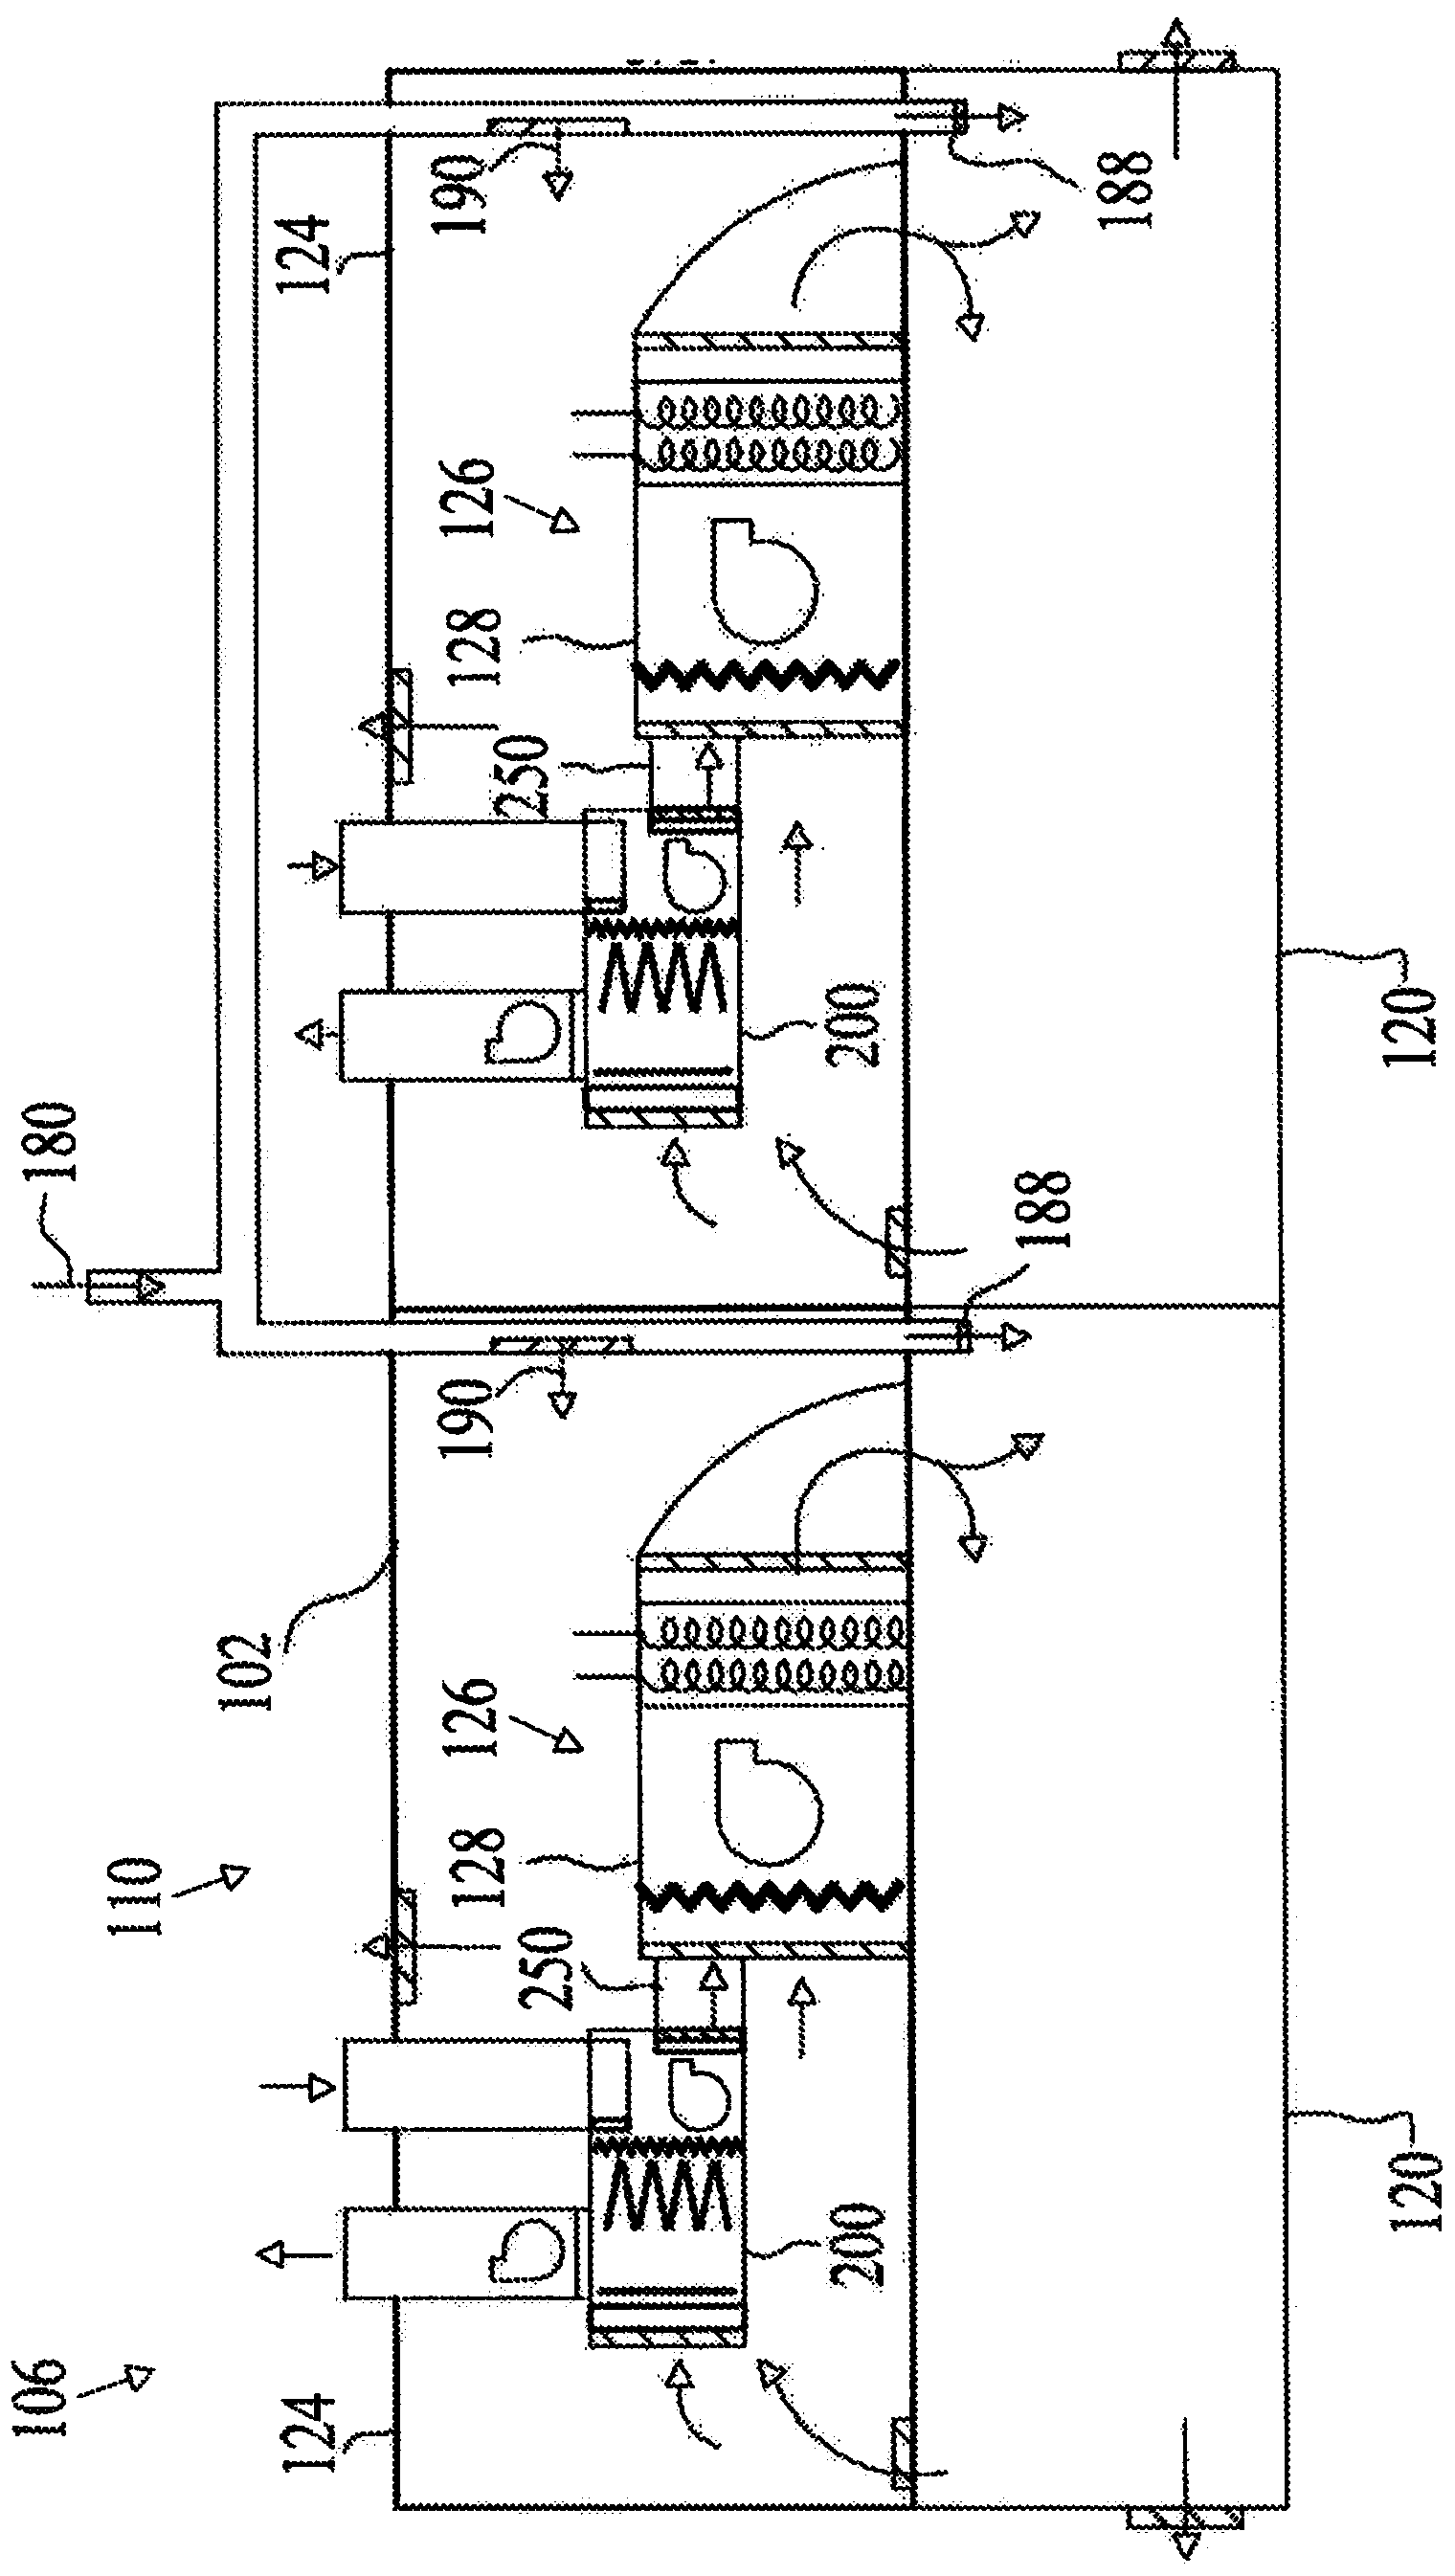 Method and system for conditioning air in an enclosed environment with distributed air circulation systems